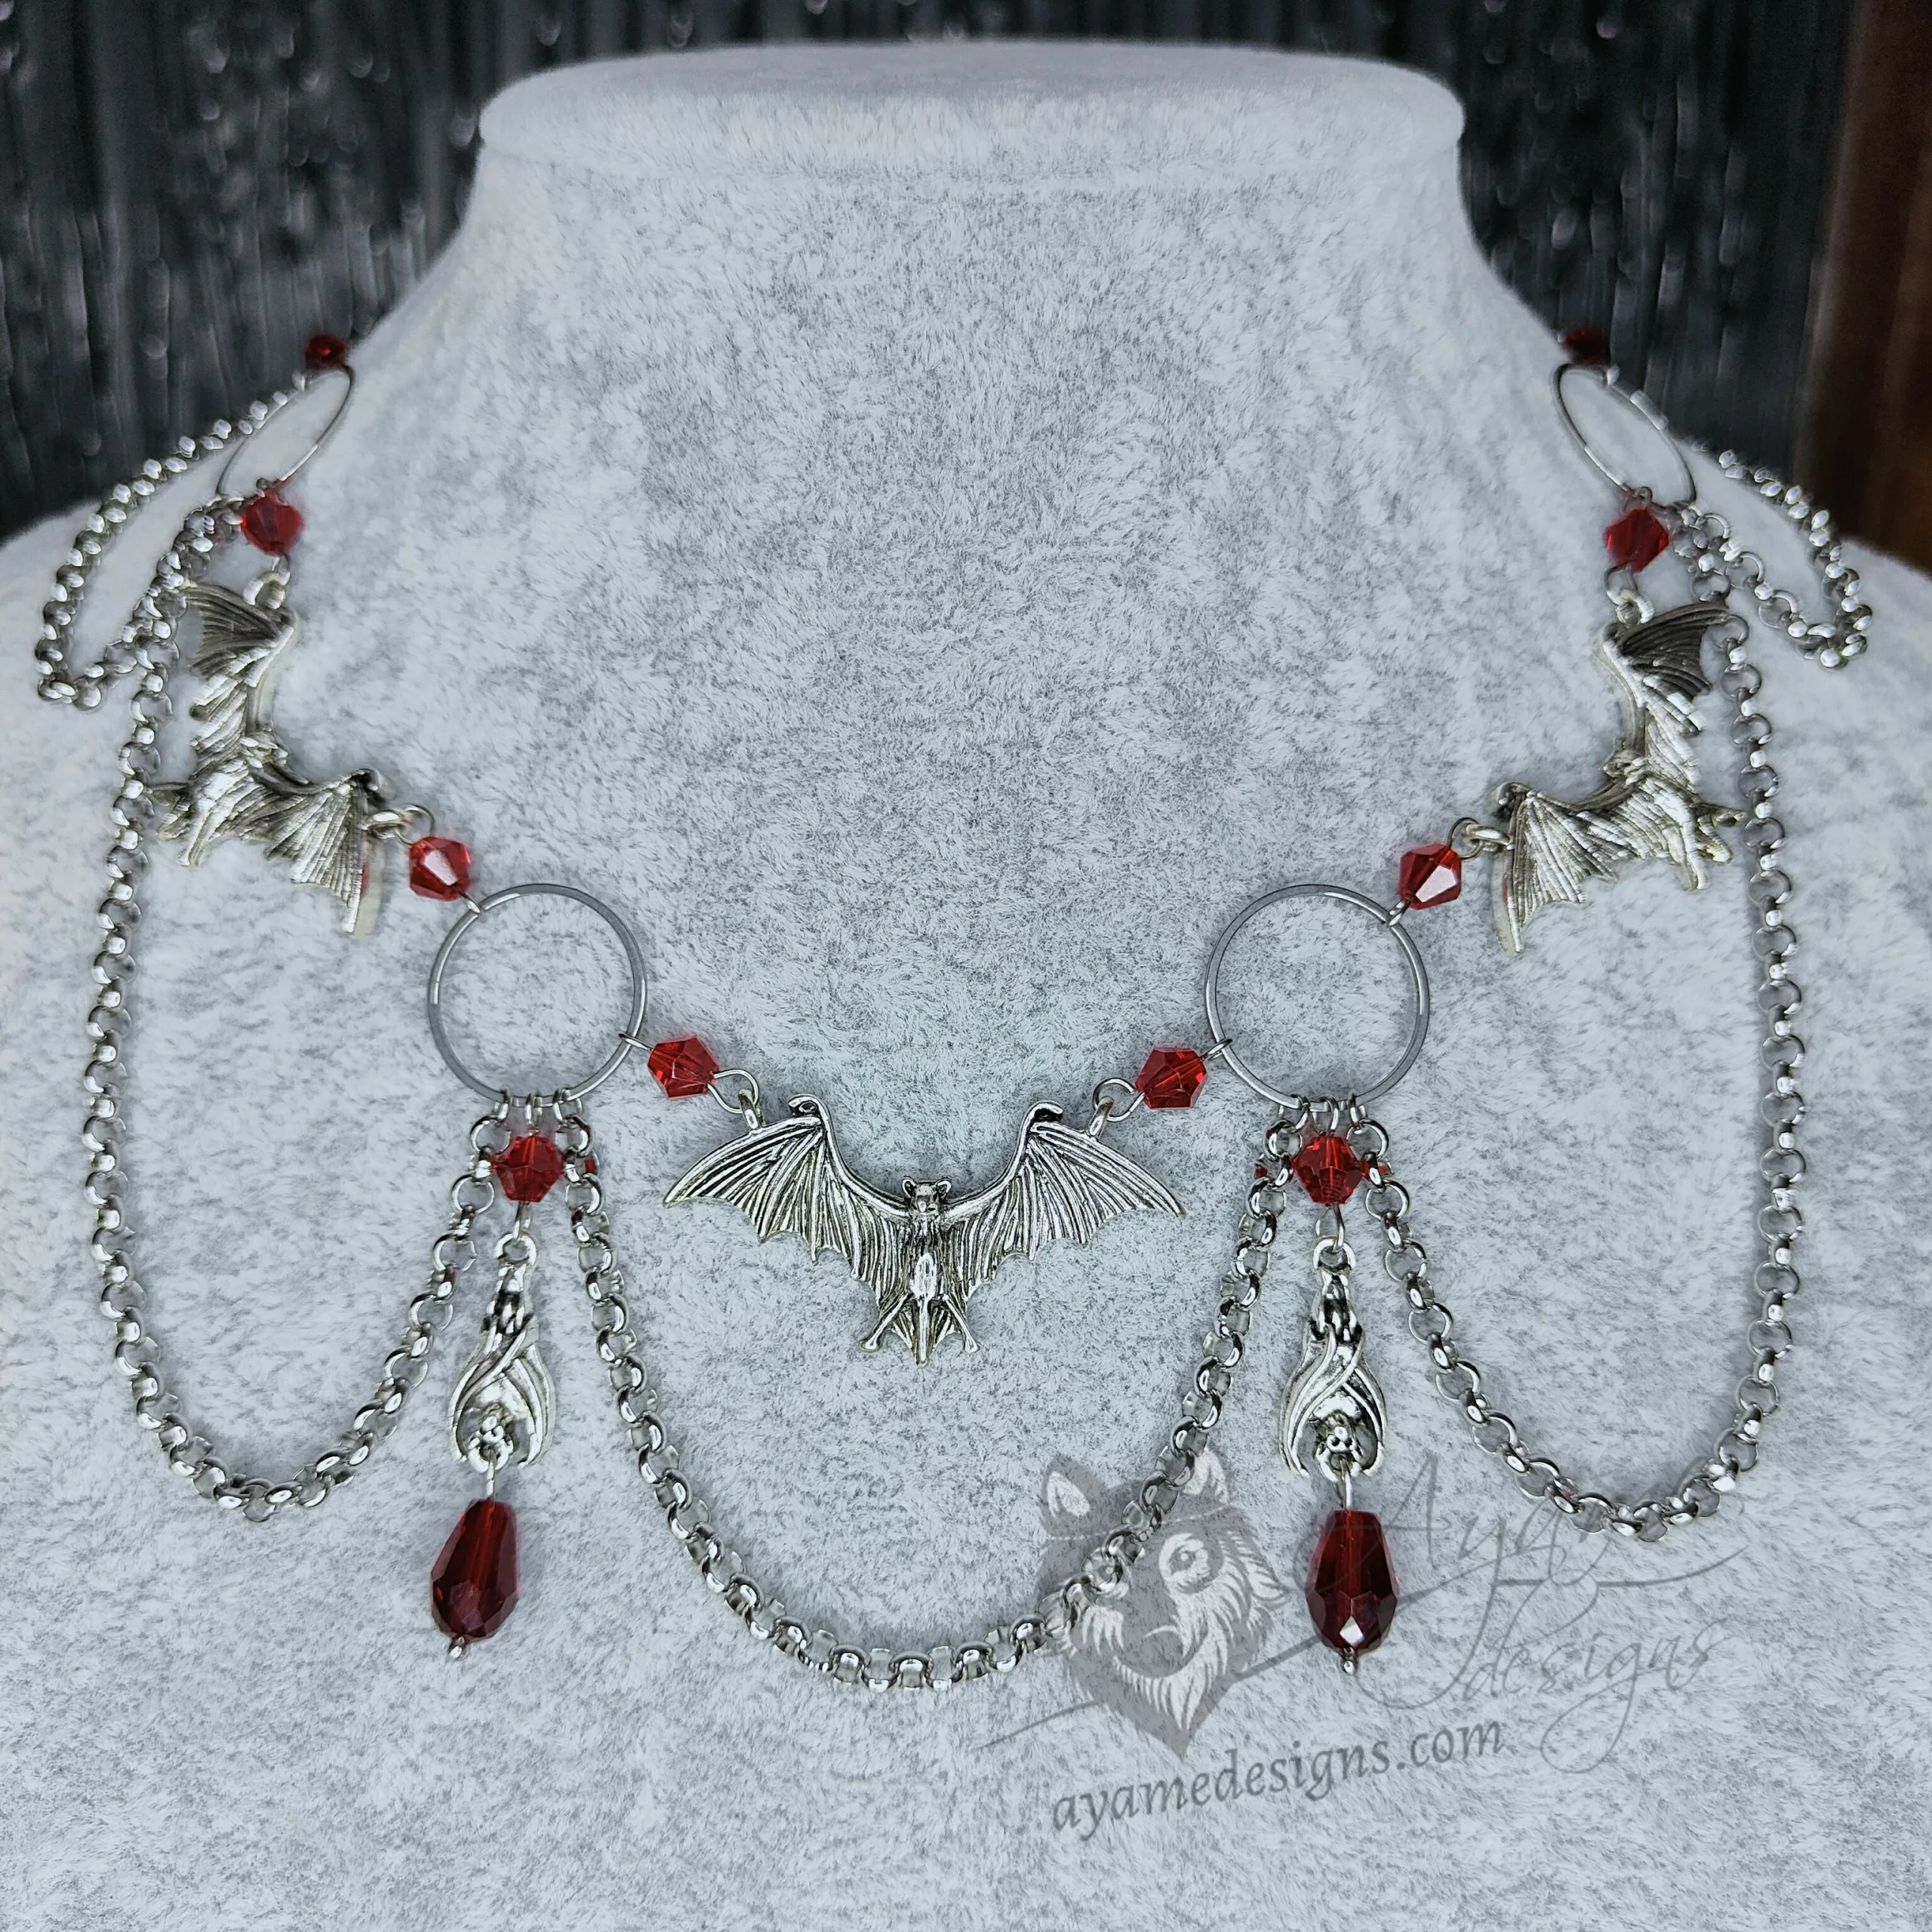 Handmade gothic necklace with large bat pendants, o-rings, red Austrian crystal beads and stainless steel chain details